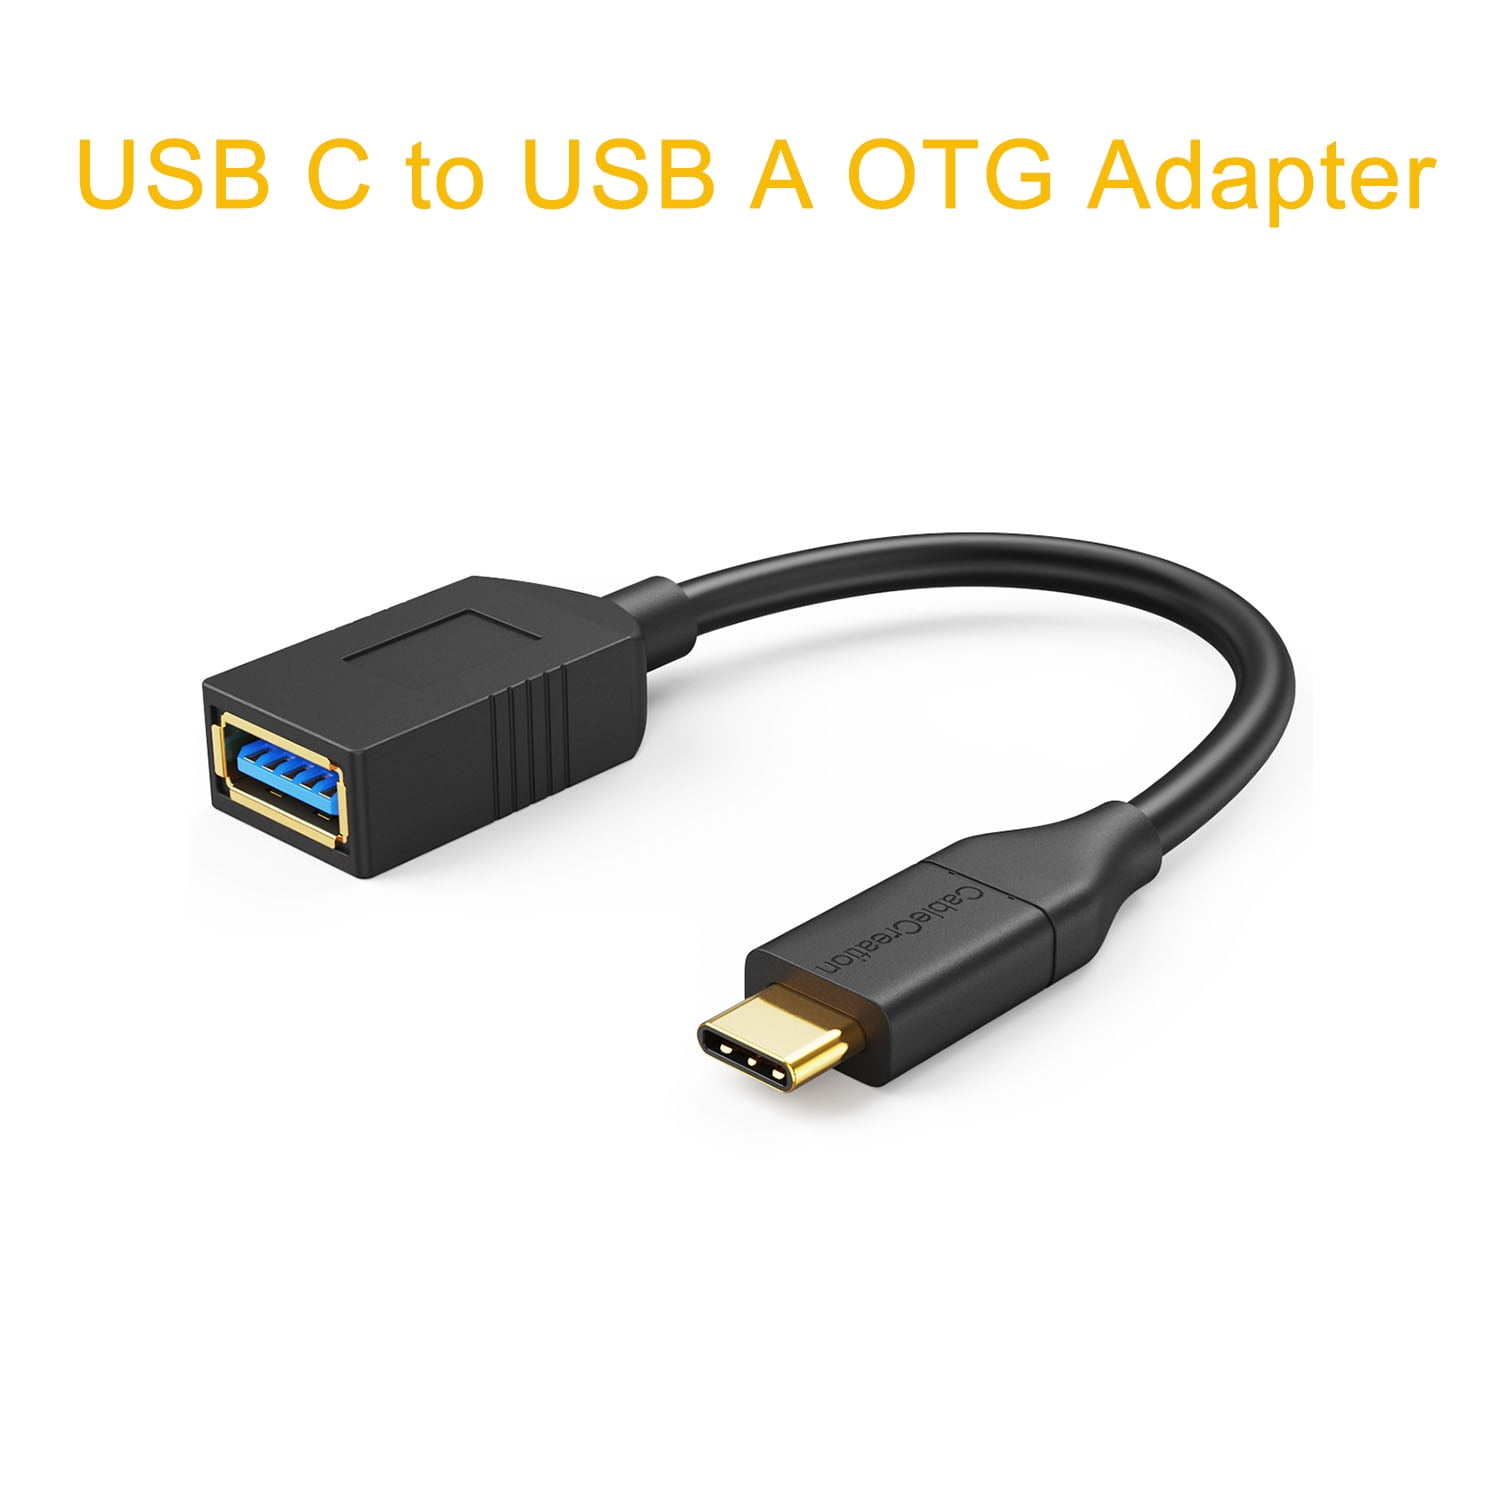 USB C OTG Adapter USB Type C to USB 3.0 Adapter 0.5ft OTG Cable Thunderbolt 3 to USB 3.0 OTG Compatible with Samsung Galaxy S22/S21/S21+/5G/S20/S10/S9/,MacBook Pro/Air 2020 iPad Pro 2020,LG V40 V30 